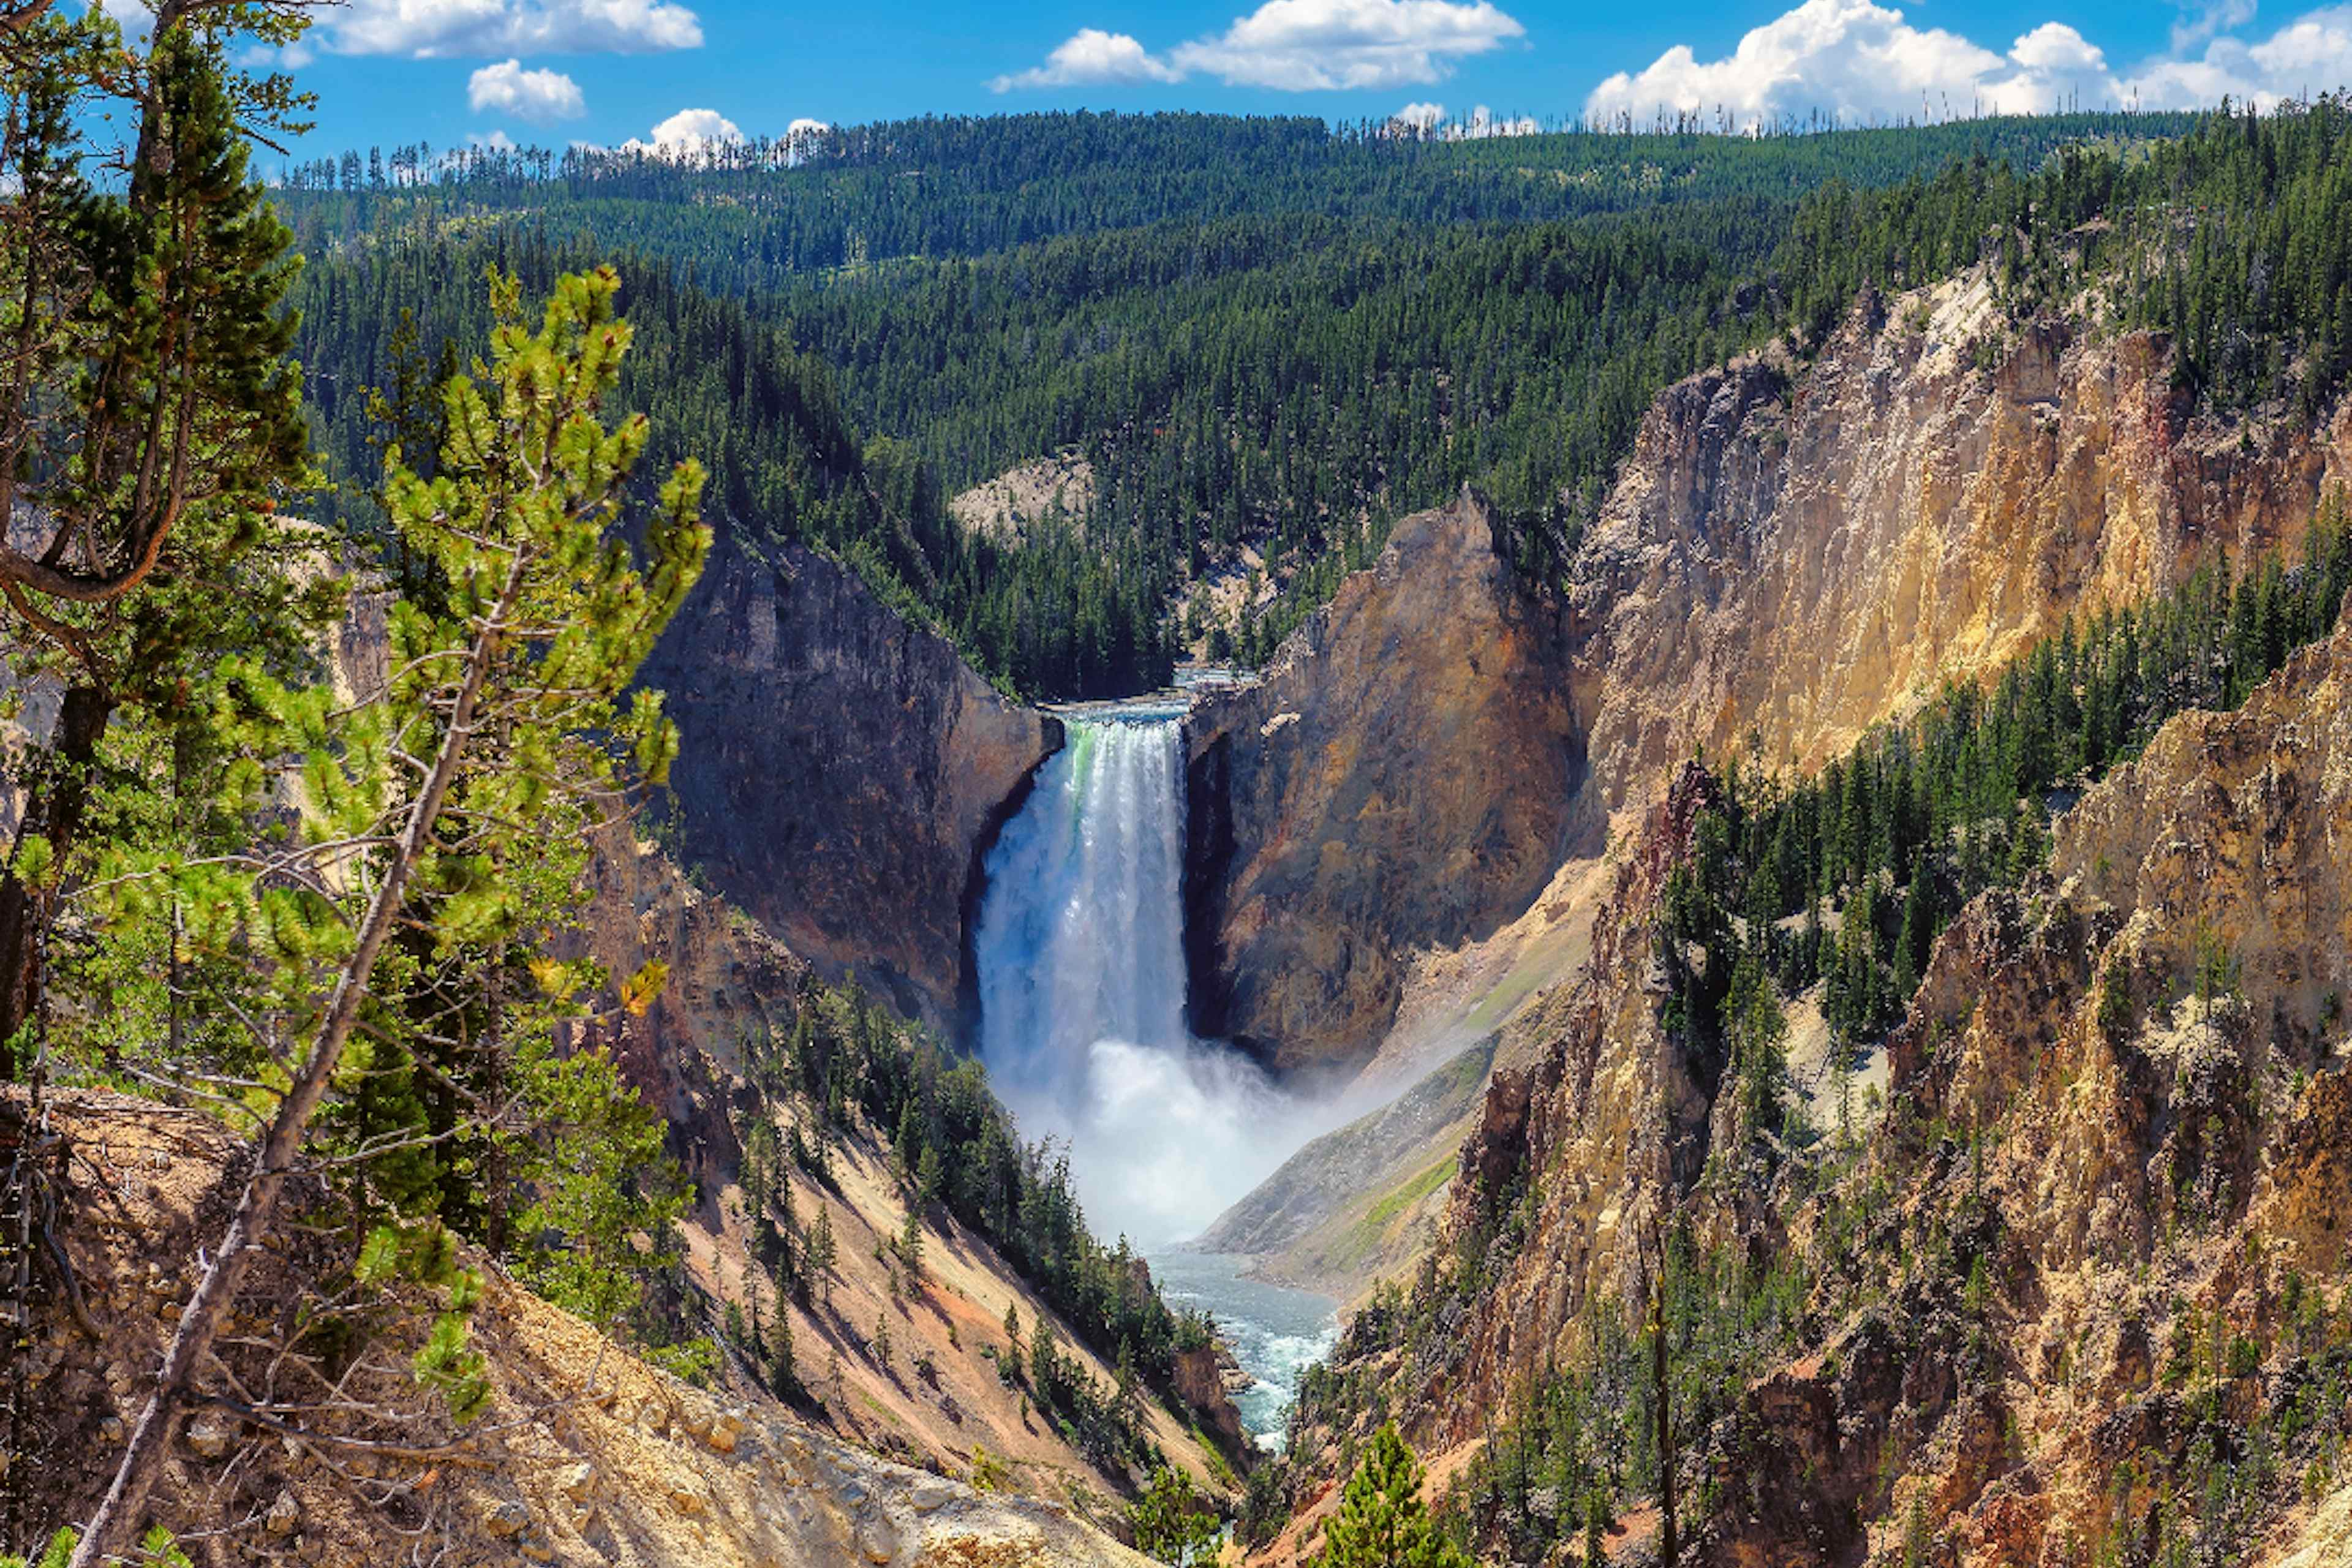 The waterfall in the Grand Canyon of Yellowstone in Yellowstone National Park in Yellowstone Teton Territory.